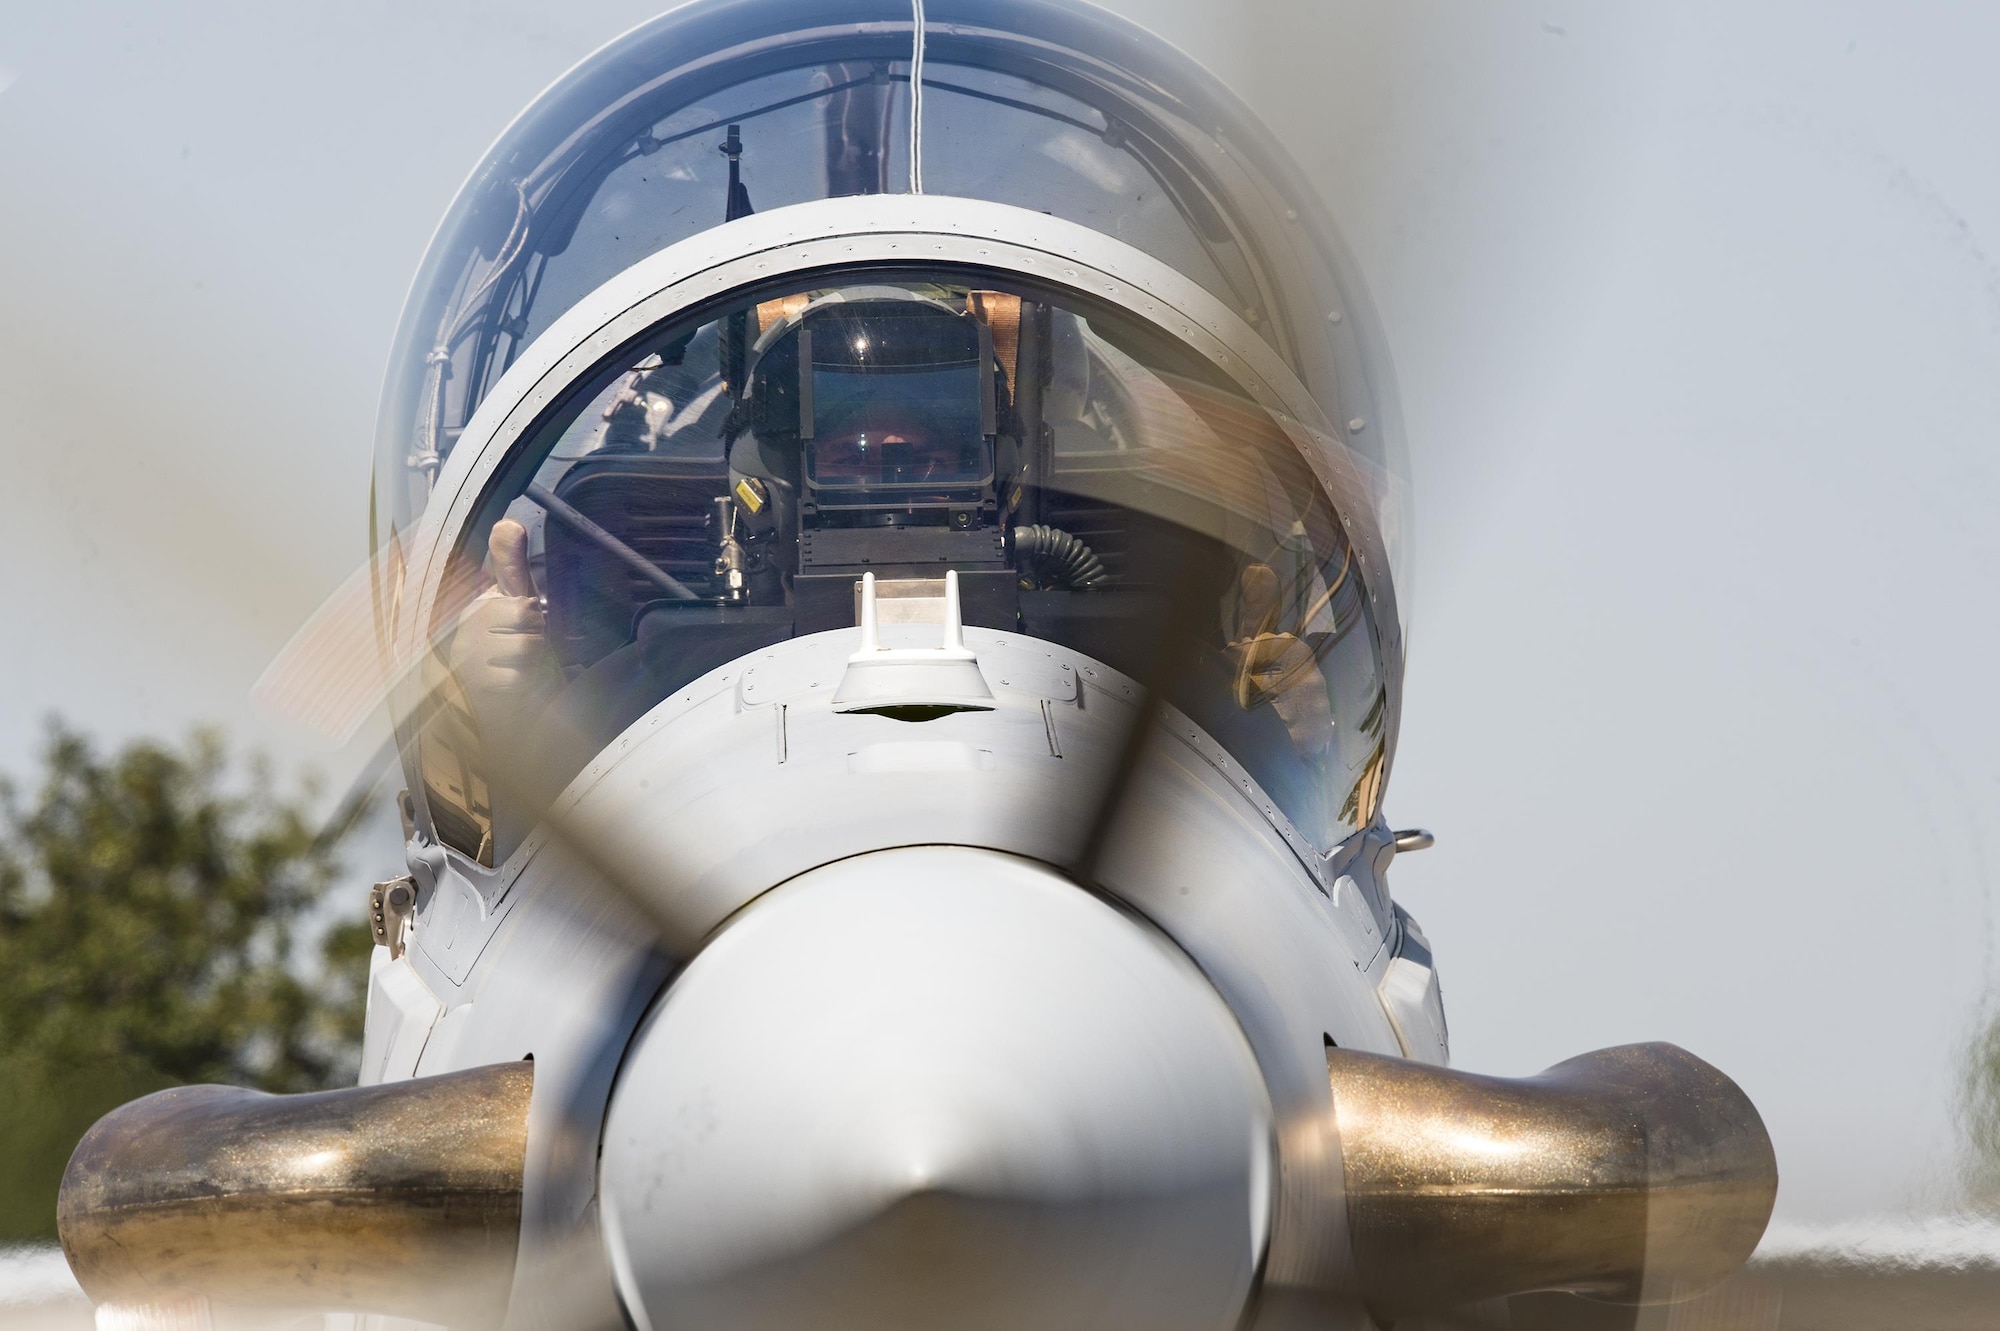 A Lebanese A-29 Super Tucano student pilot from the 81st Fighter Squadron, conducts the first ‘in-seat’ training sortie, March 22, 2017, at Moody Air Force Base, Ga. The program began in March 2017 and is designed to ensure the Lebanon air force receives the support and training needed to safely and effectively employ the A-29 Aircraft. (U.S. Air Force photo by Senior Airman Ceaira Young)